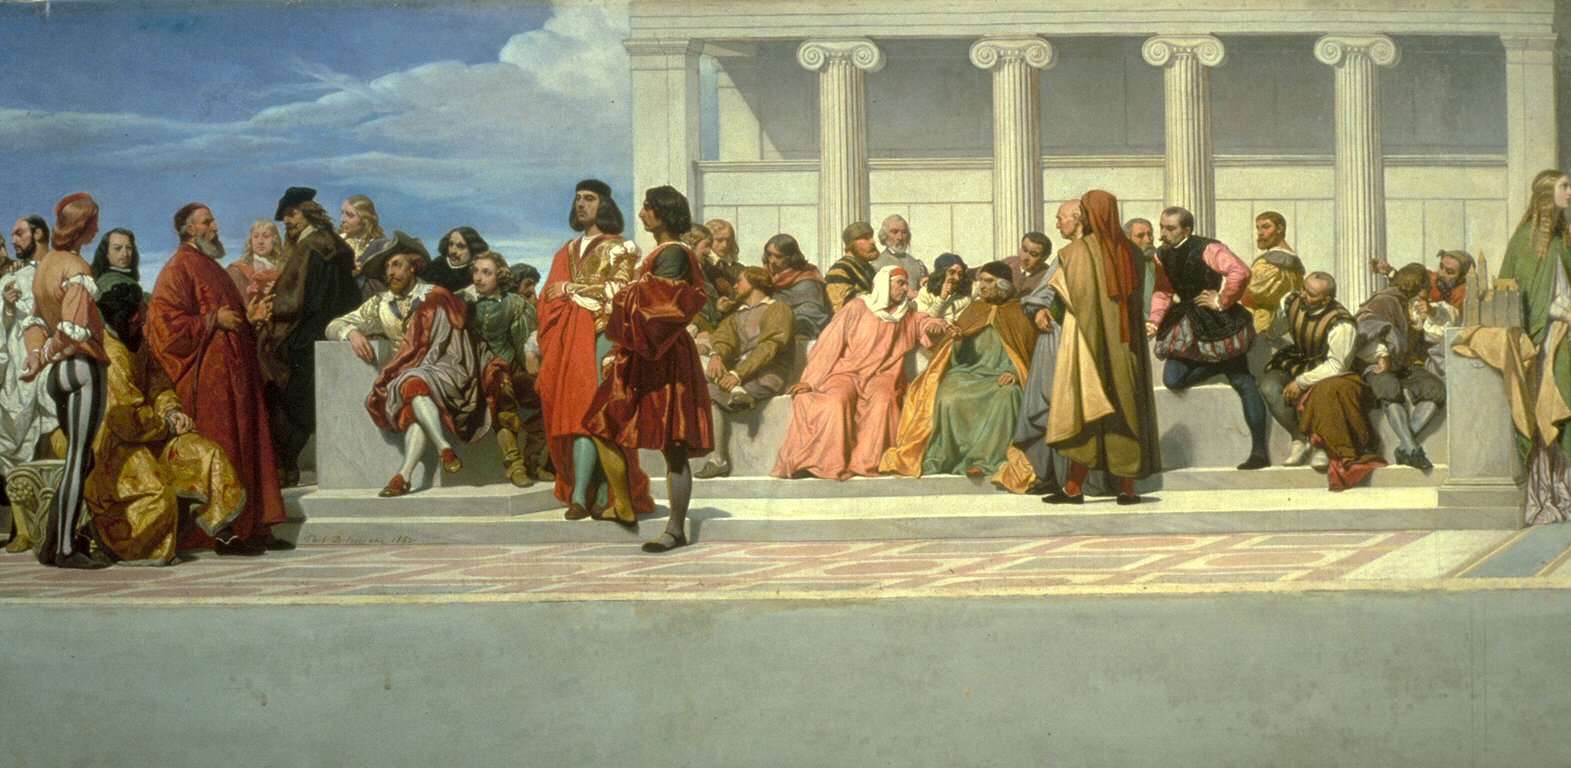 In this replica painting by artist Charles Béranger, located in the Walters Art Museum, Phidias is depicted in the center of the auditorium.